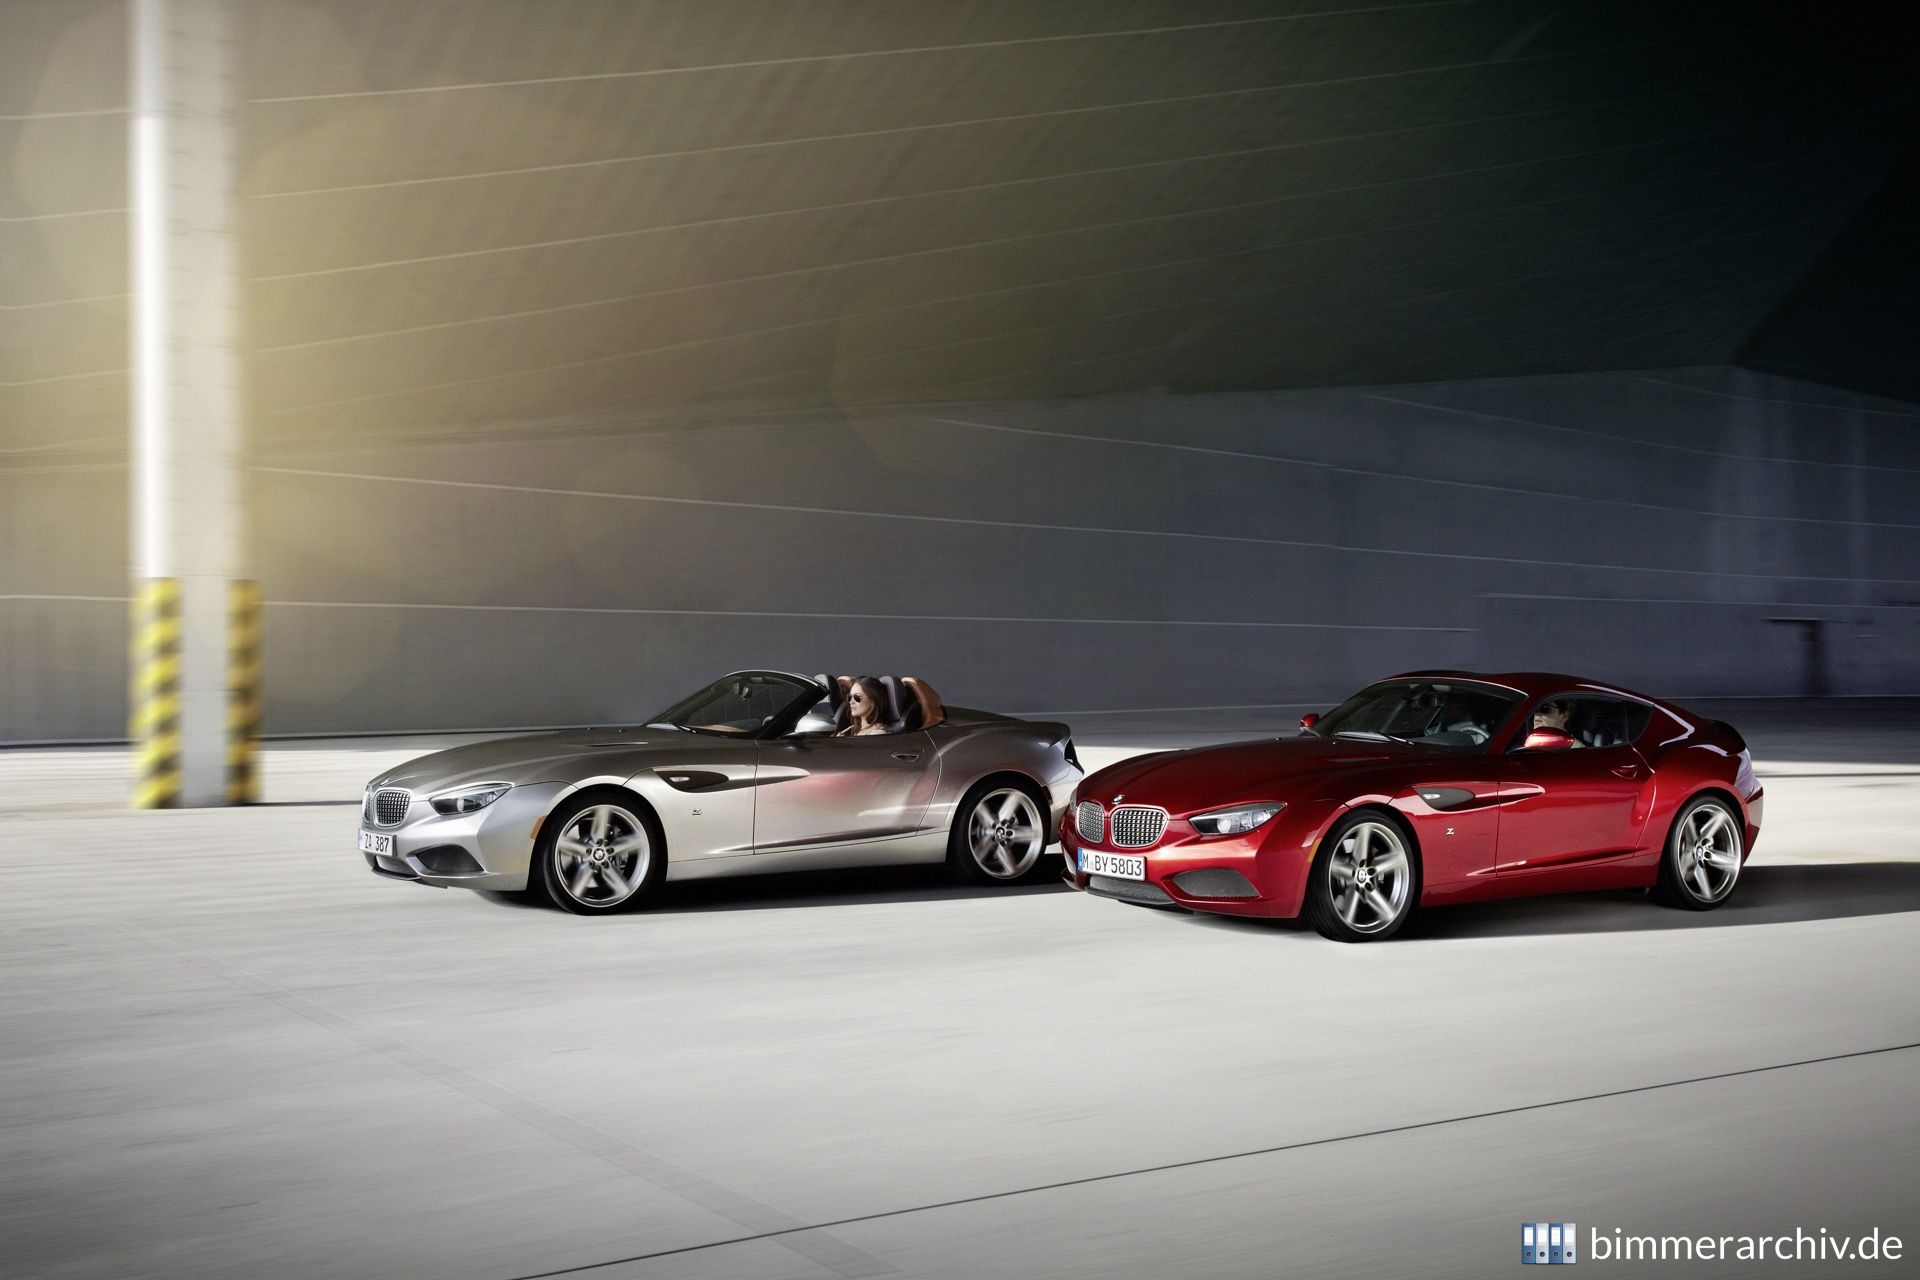 BMW Zagato Roadster and Coupe